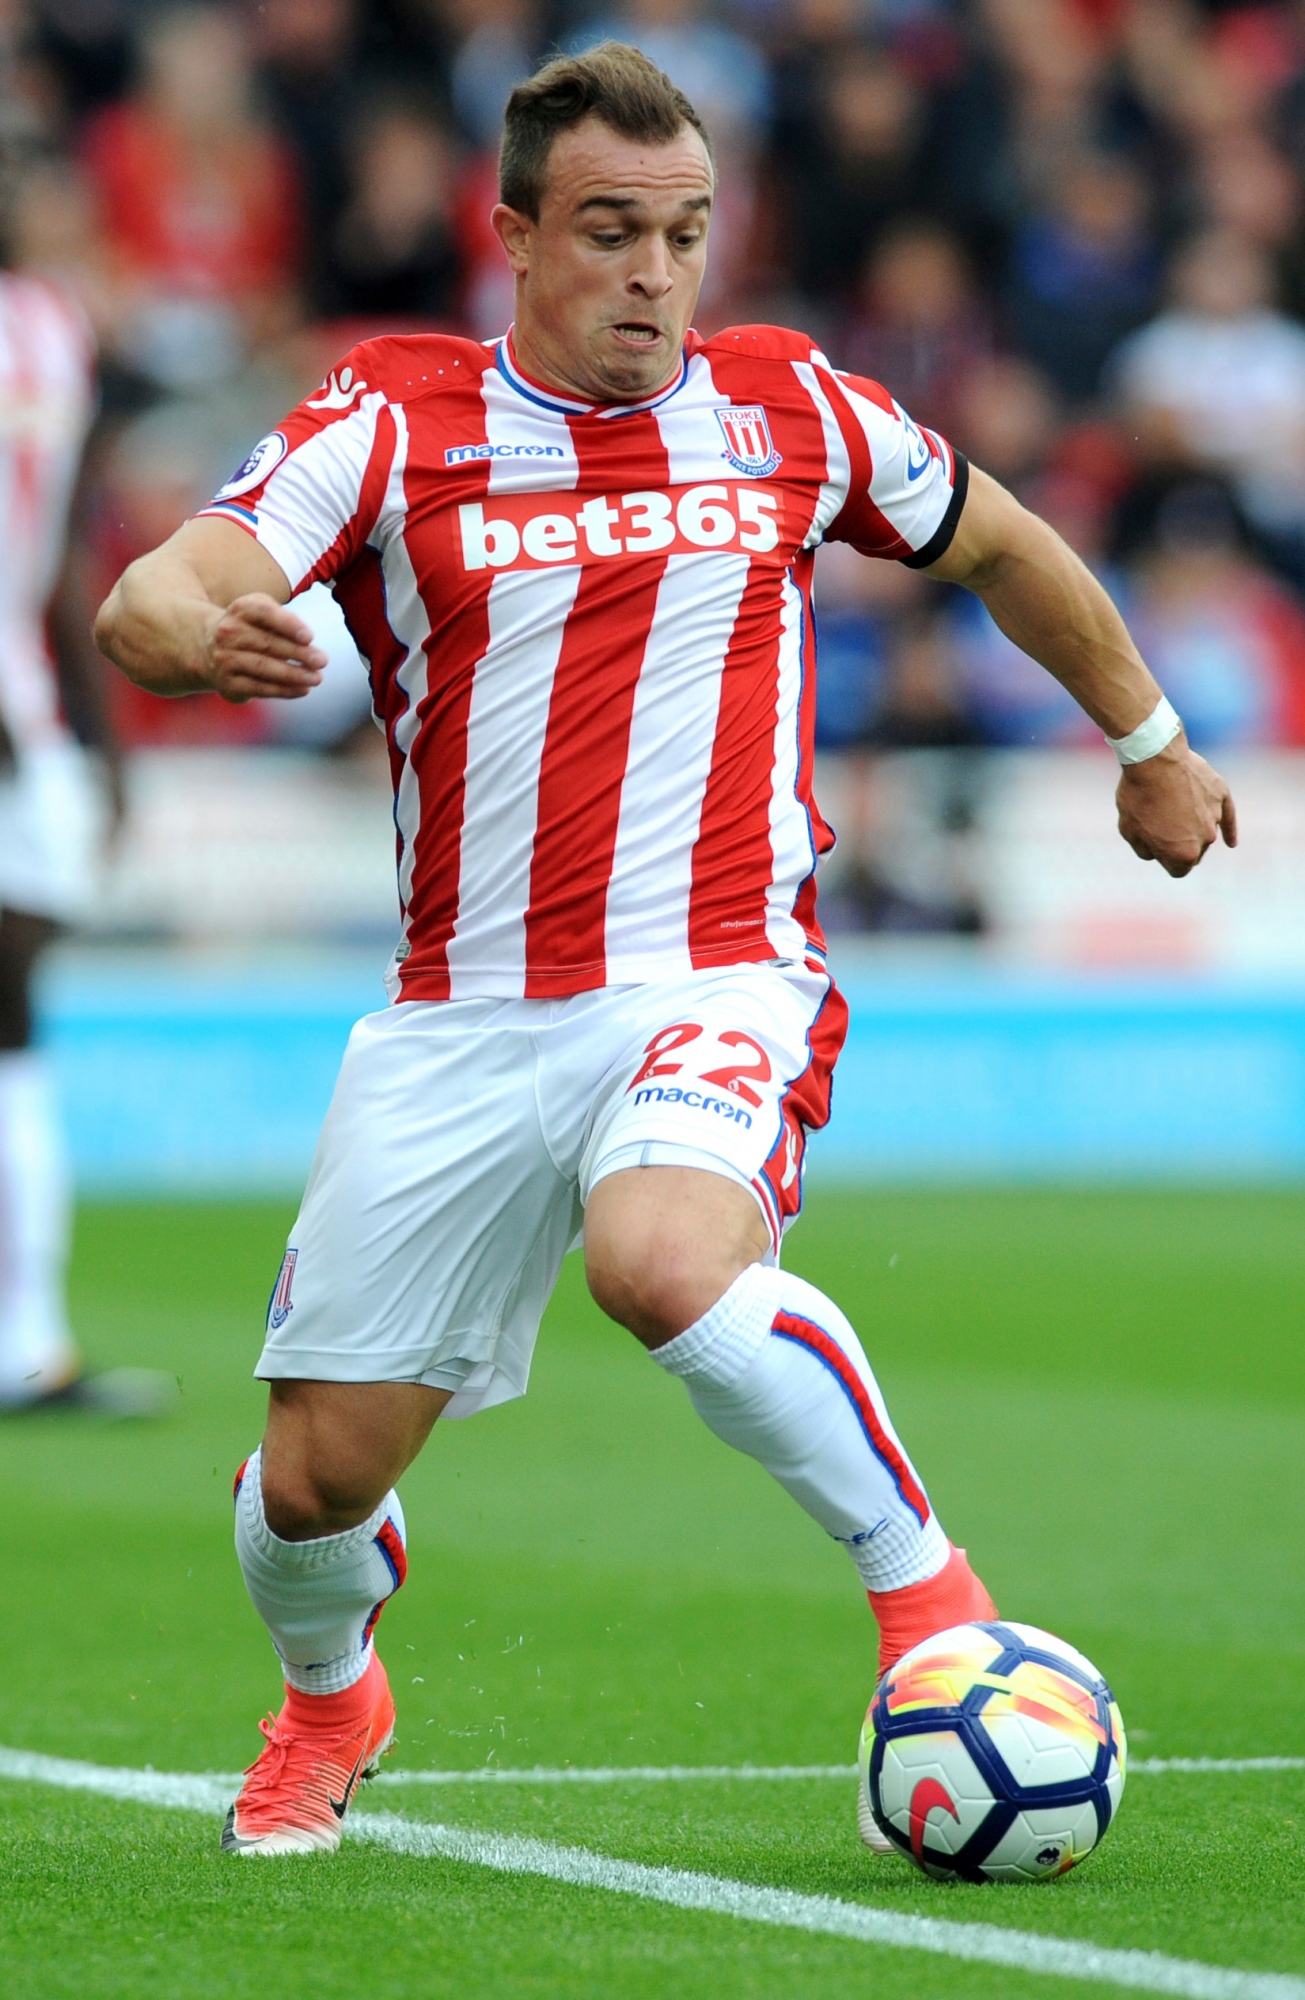 Stoke's Xherdan Shaqiri during the English Premier League soccer match between Stoke City and Arsenal at the Bet365 Stadium in Stoke on Trent, England, Saturday, Aug. 19, 2017. (AP Photo/Rui Vieira)d BRITAIN SOCCER PREMIER LEAGUE